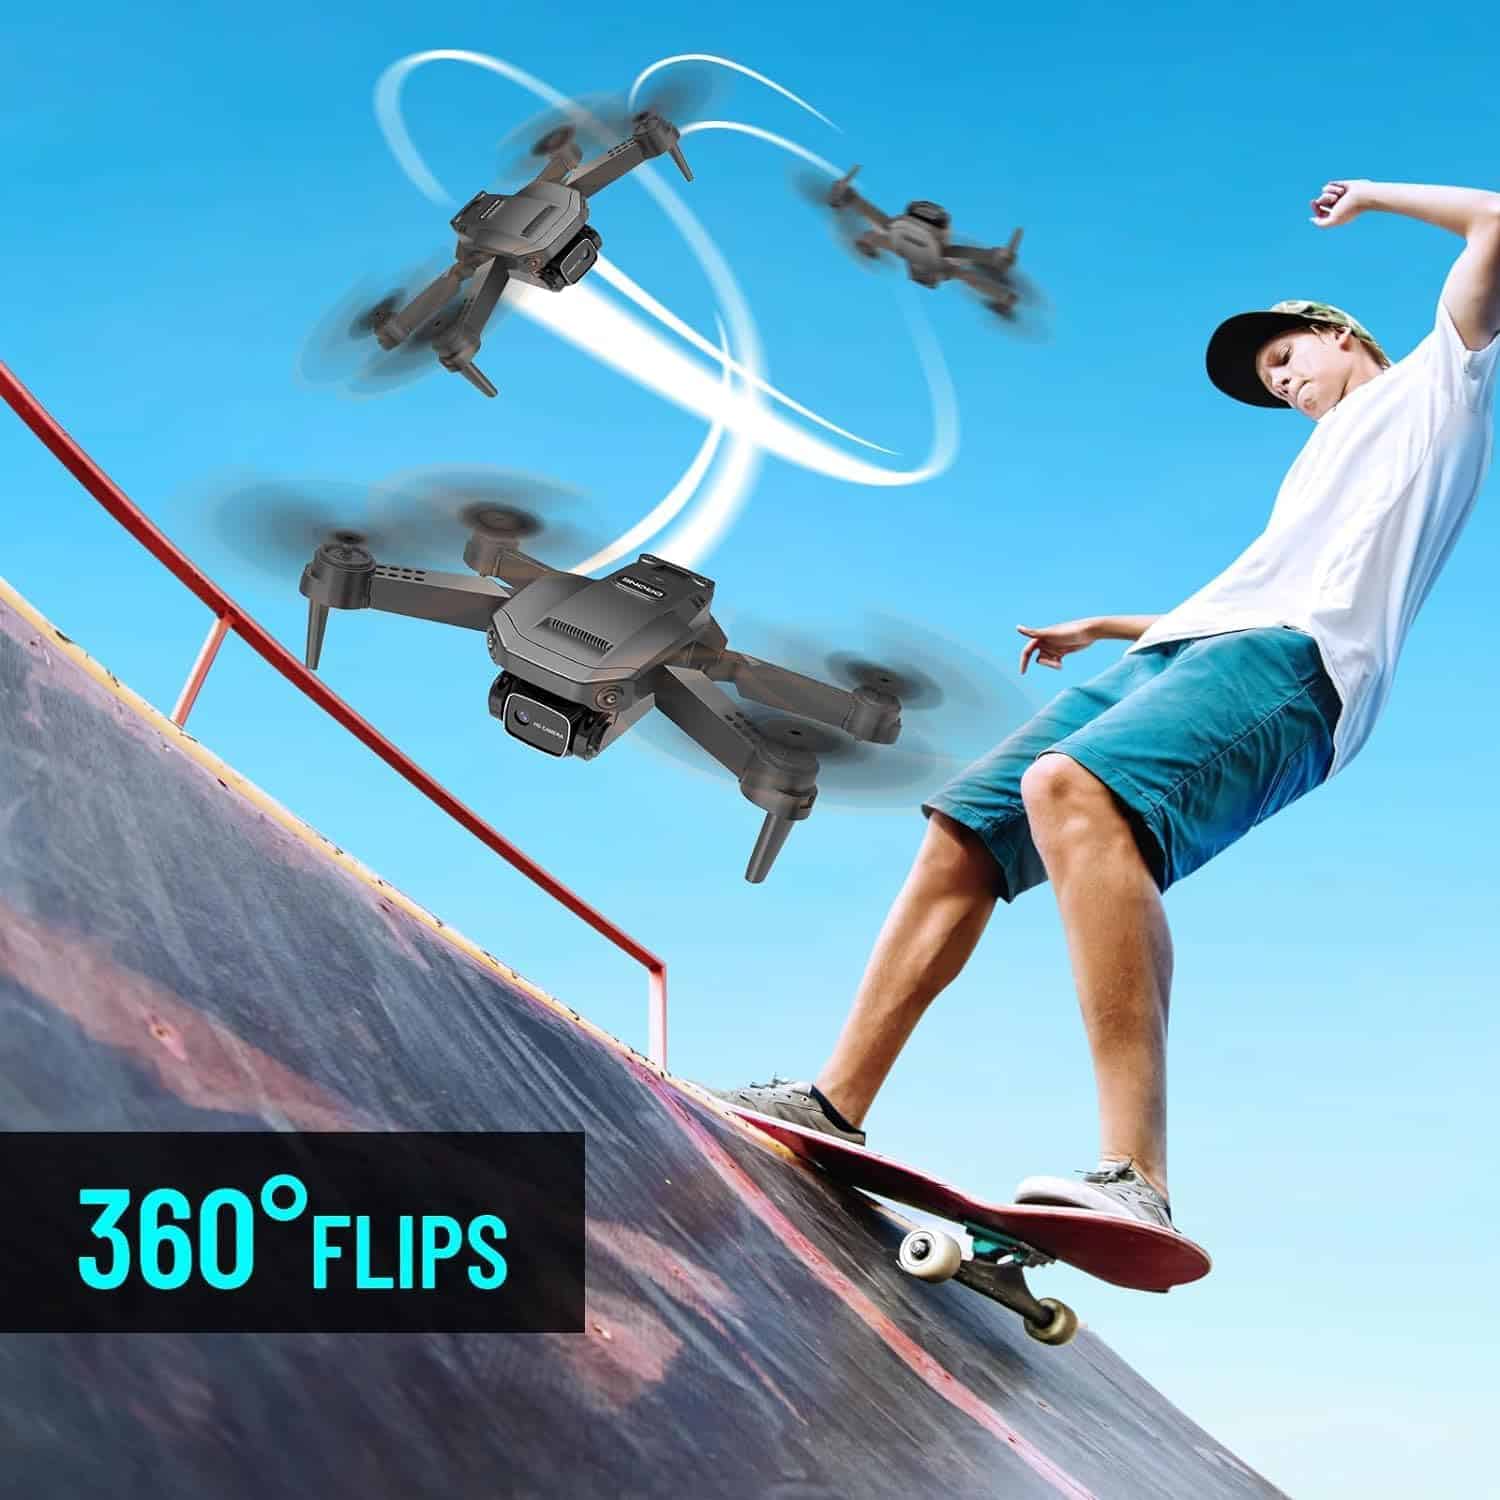 GOFOIT E60 Drone with Camera: The Perfect Quadcopter for Capturing Unforgettable Moments